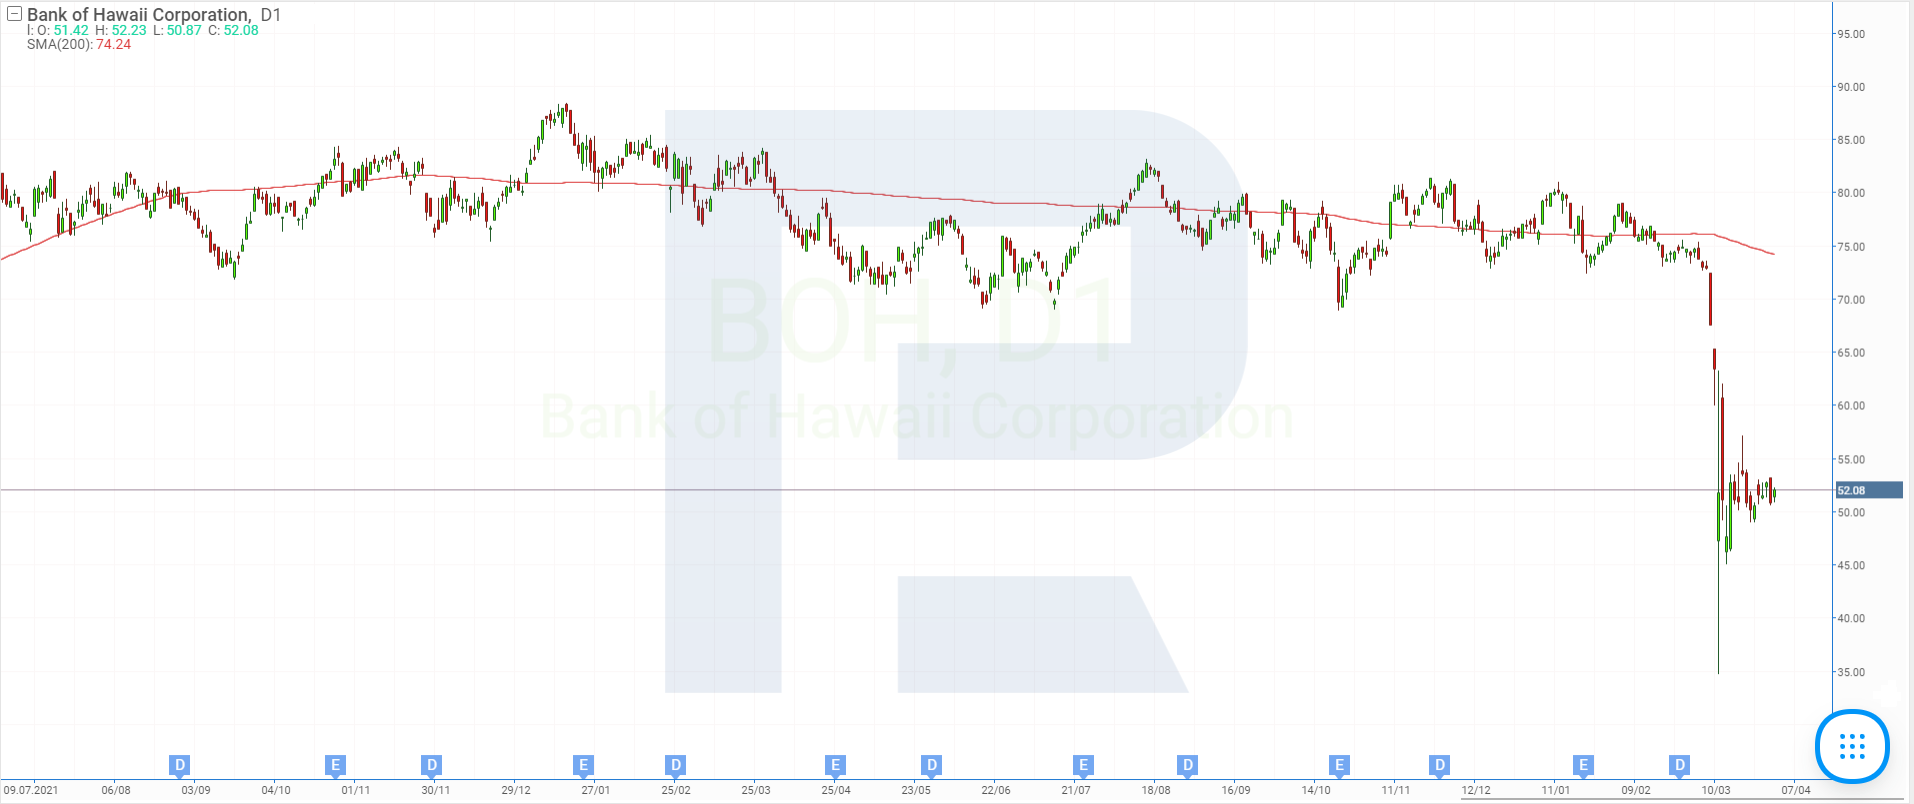 Stock price charts of Bank of Hawaii Corporation